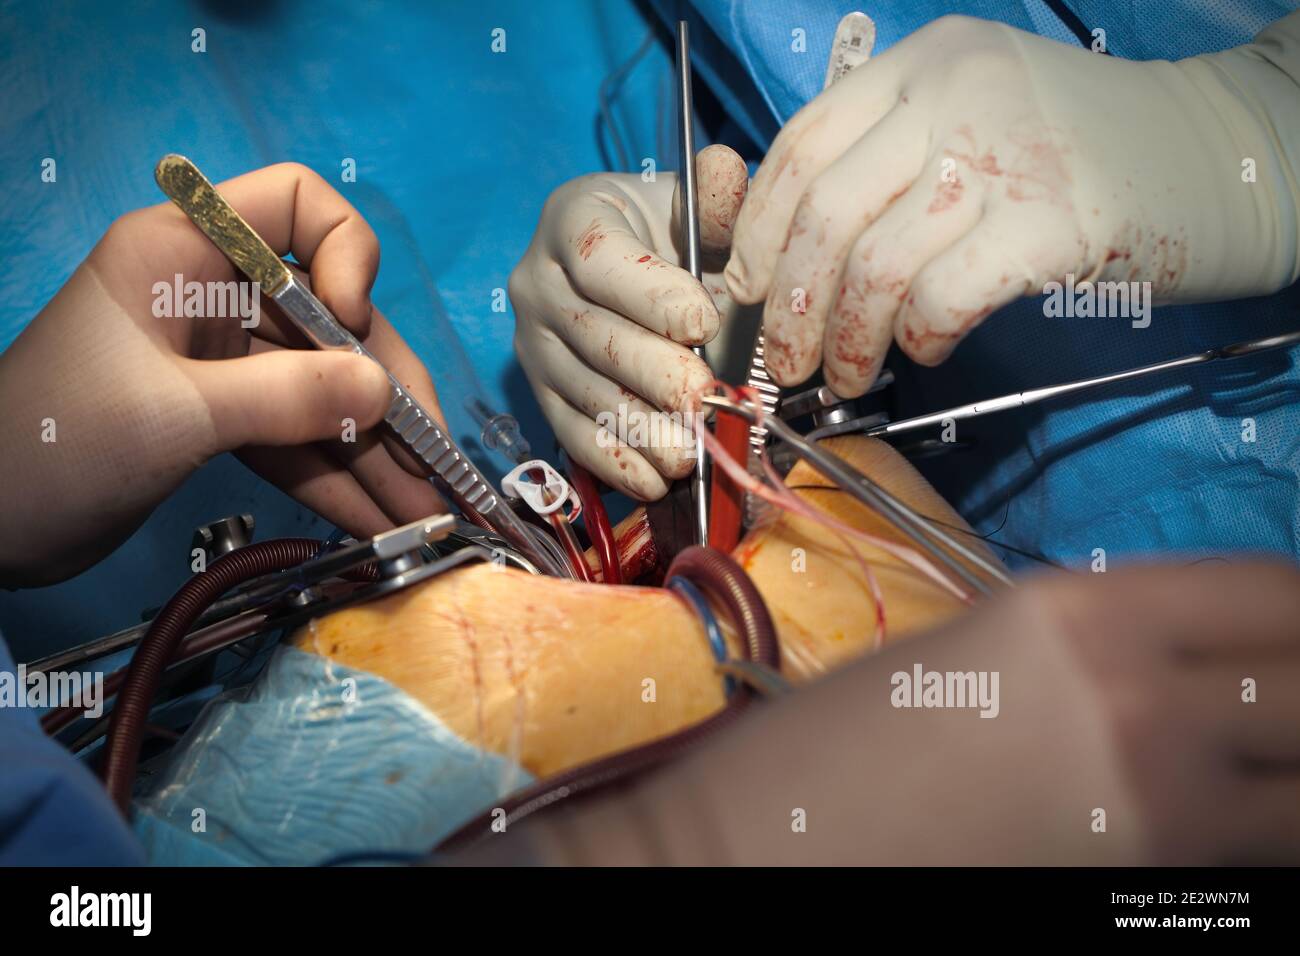 Working surgeons during surgical procedure. Stock Photo